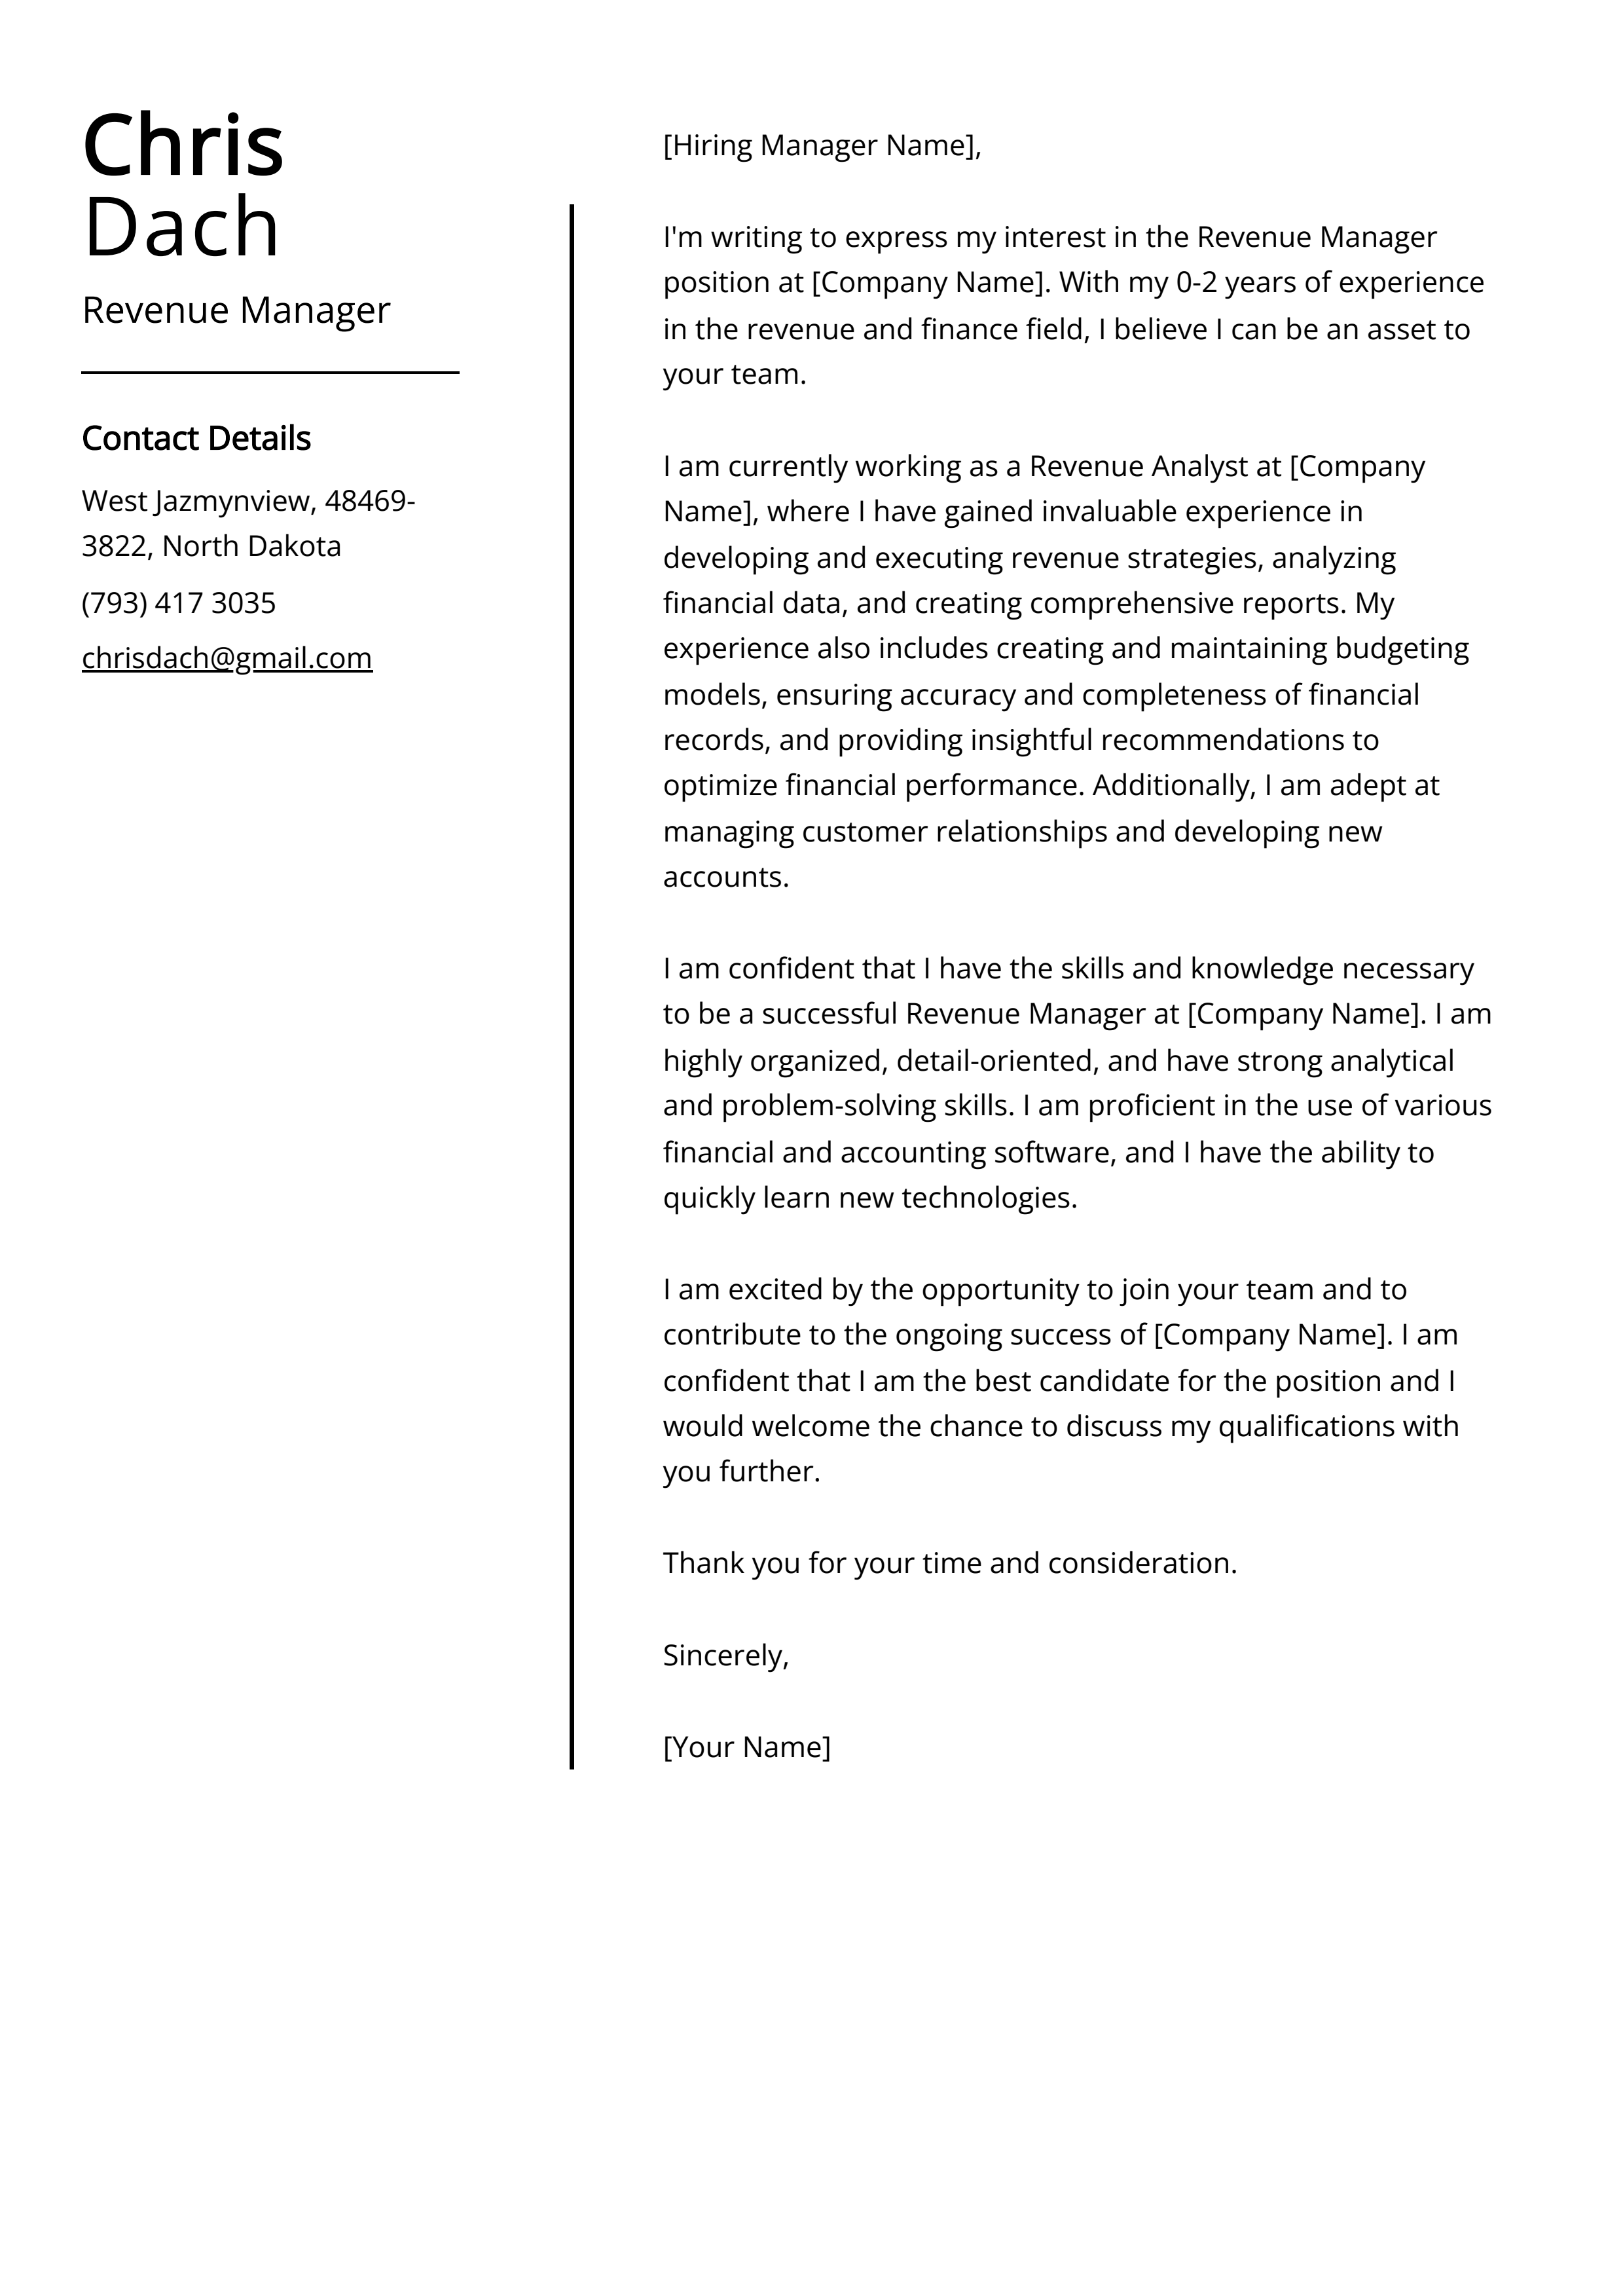 Revenue Manager Cover Letter Example